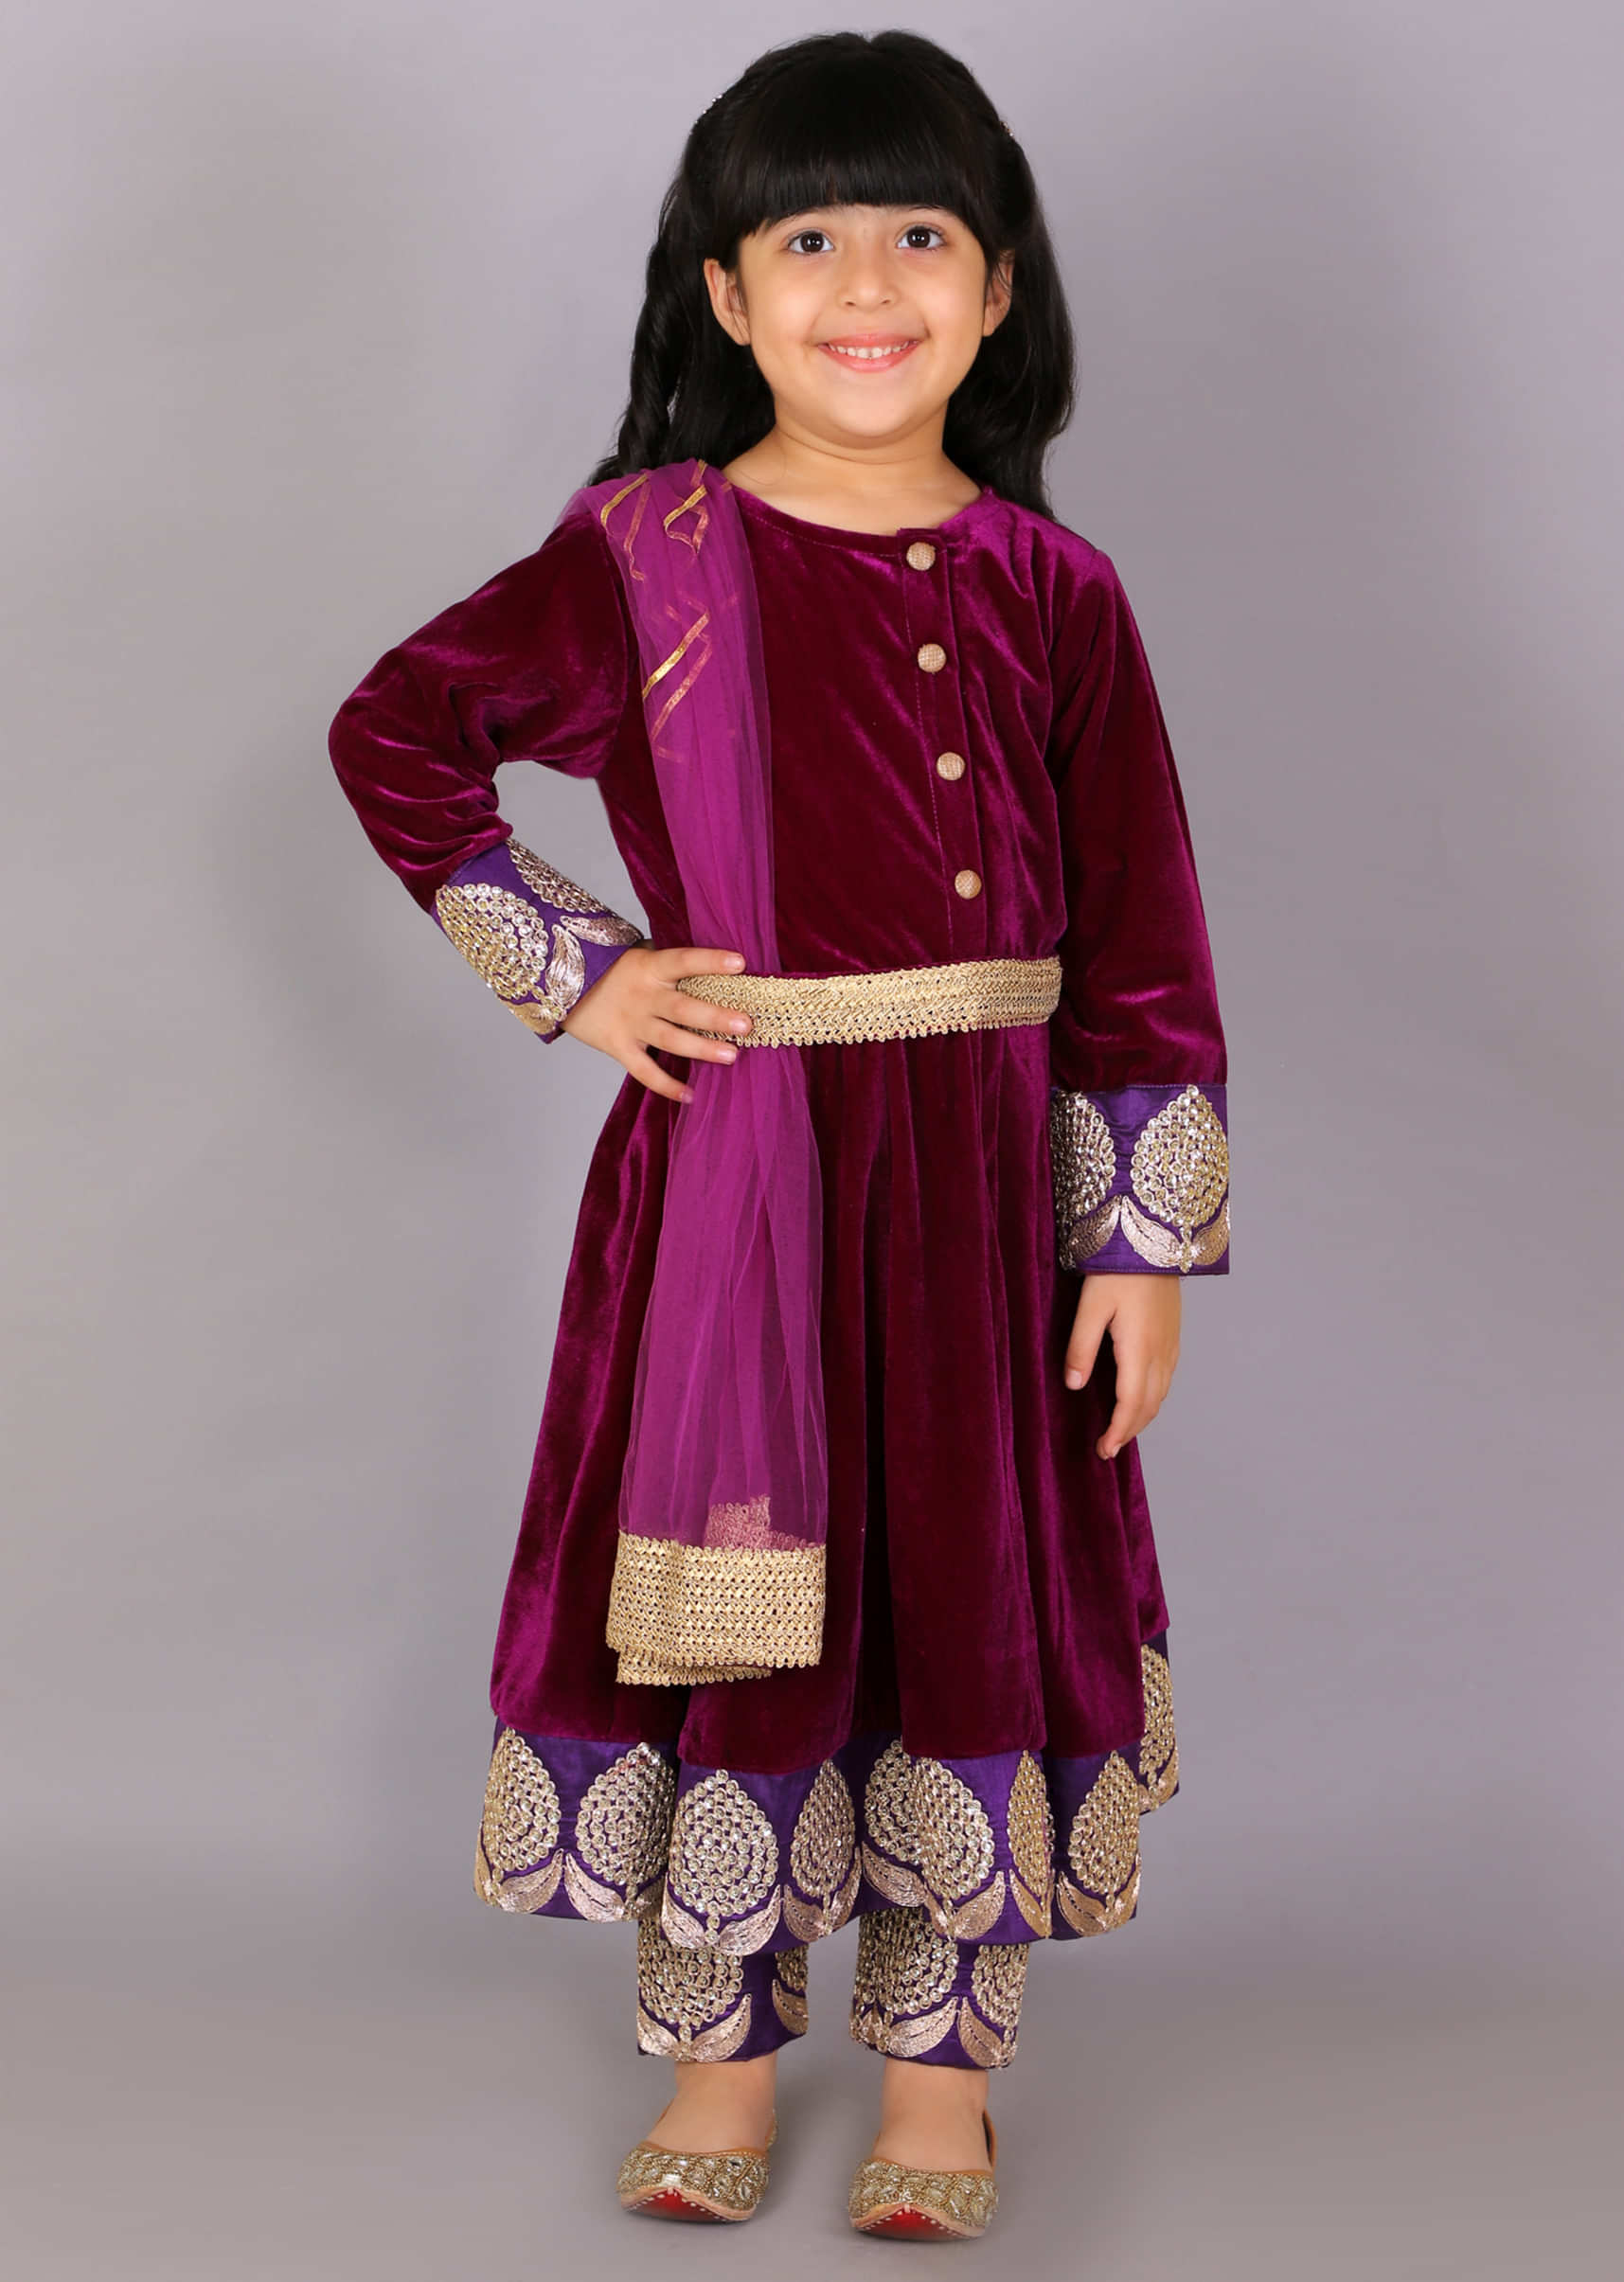 Kalki Girls Purple Anarkali Suit In Velvet With Antique Lace At The Waist And Embroidered Border